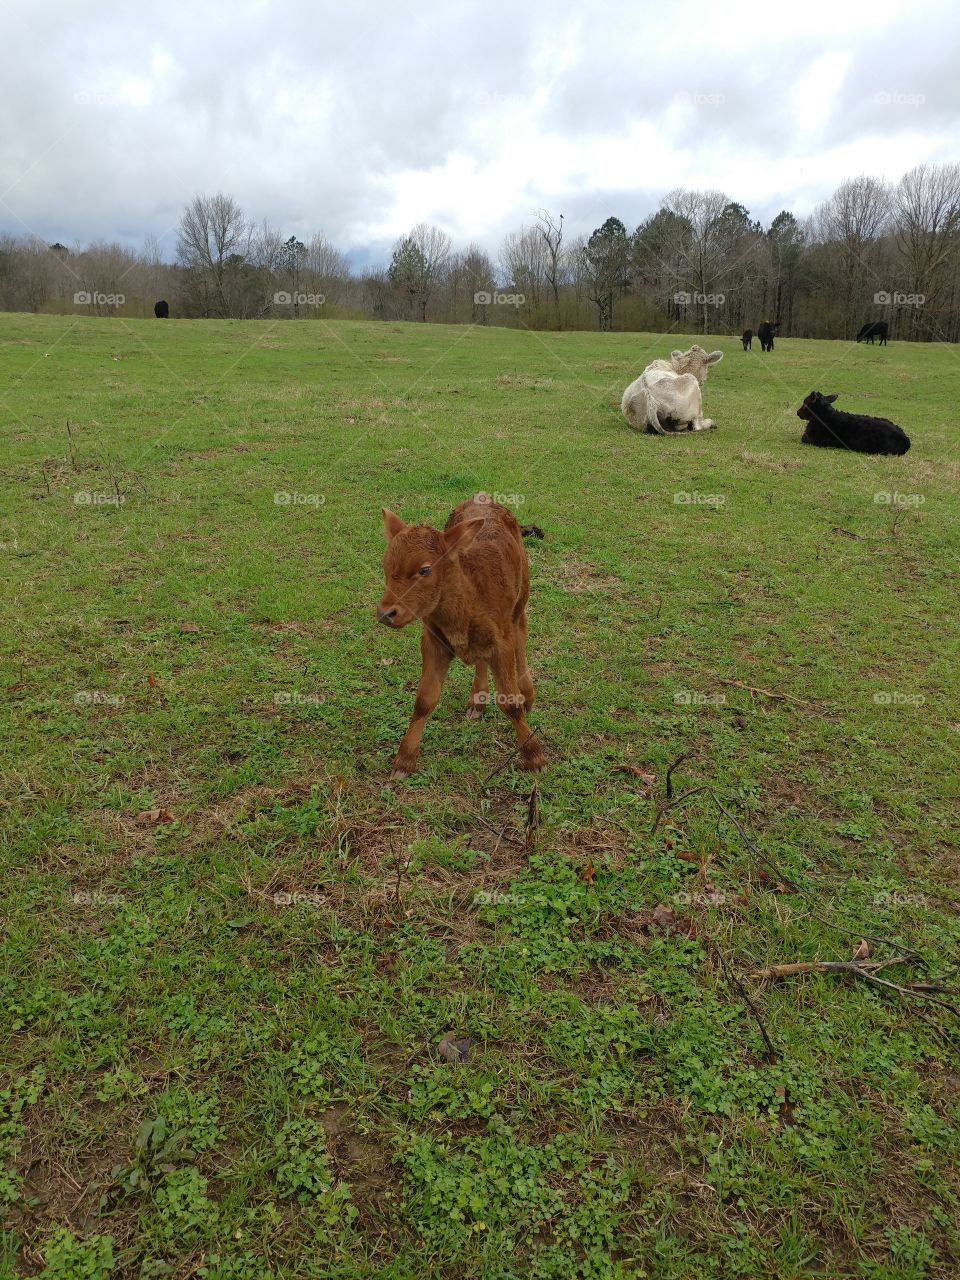 A day old brown calf with mother nearby that is unsure about the camera. He can't decide whether to run back to mom or investigate.